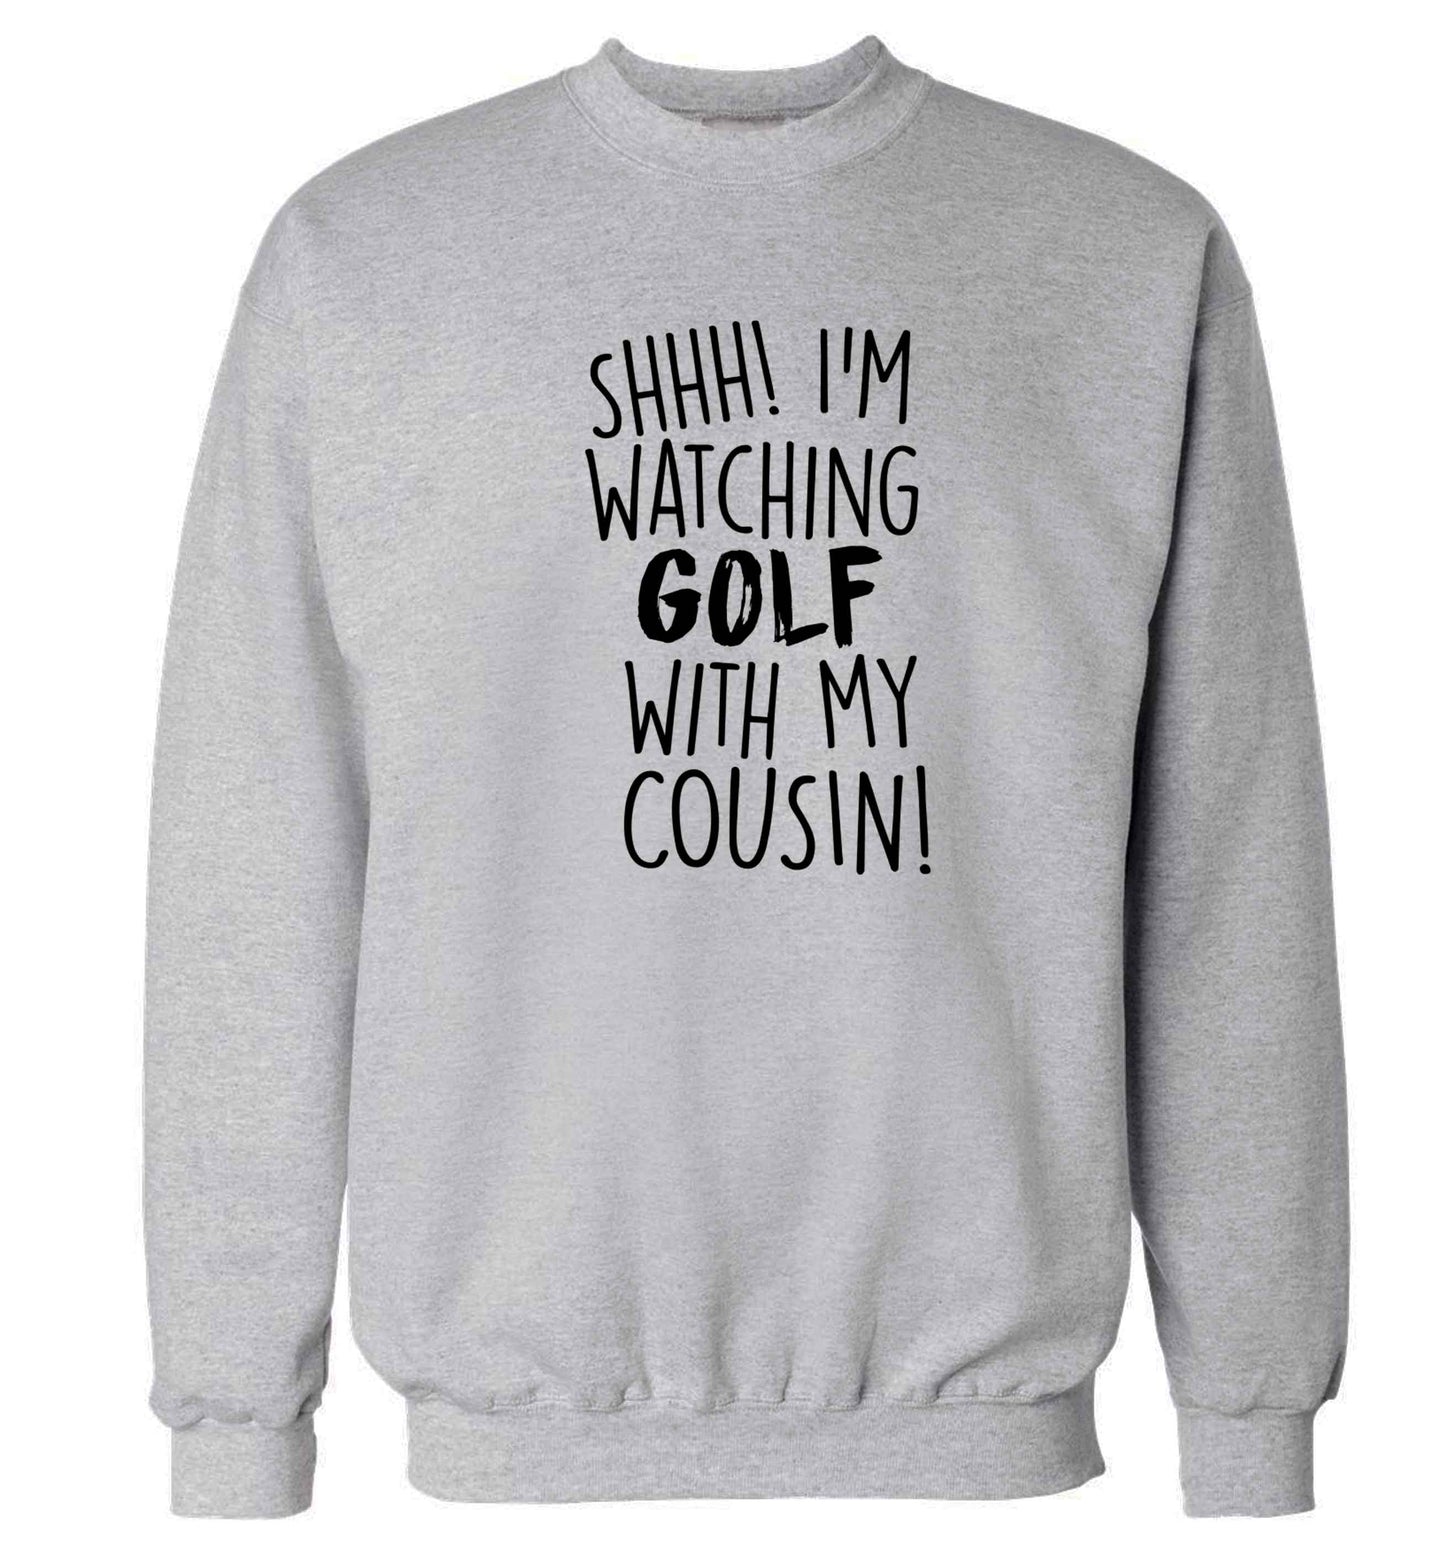 Shh I'm watching golf with my cousin Adult's unisex grey Sweater 2XL